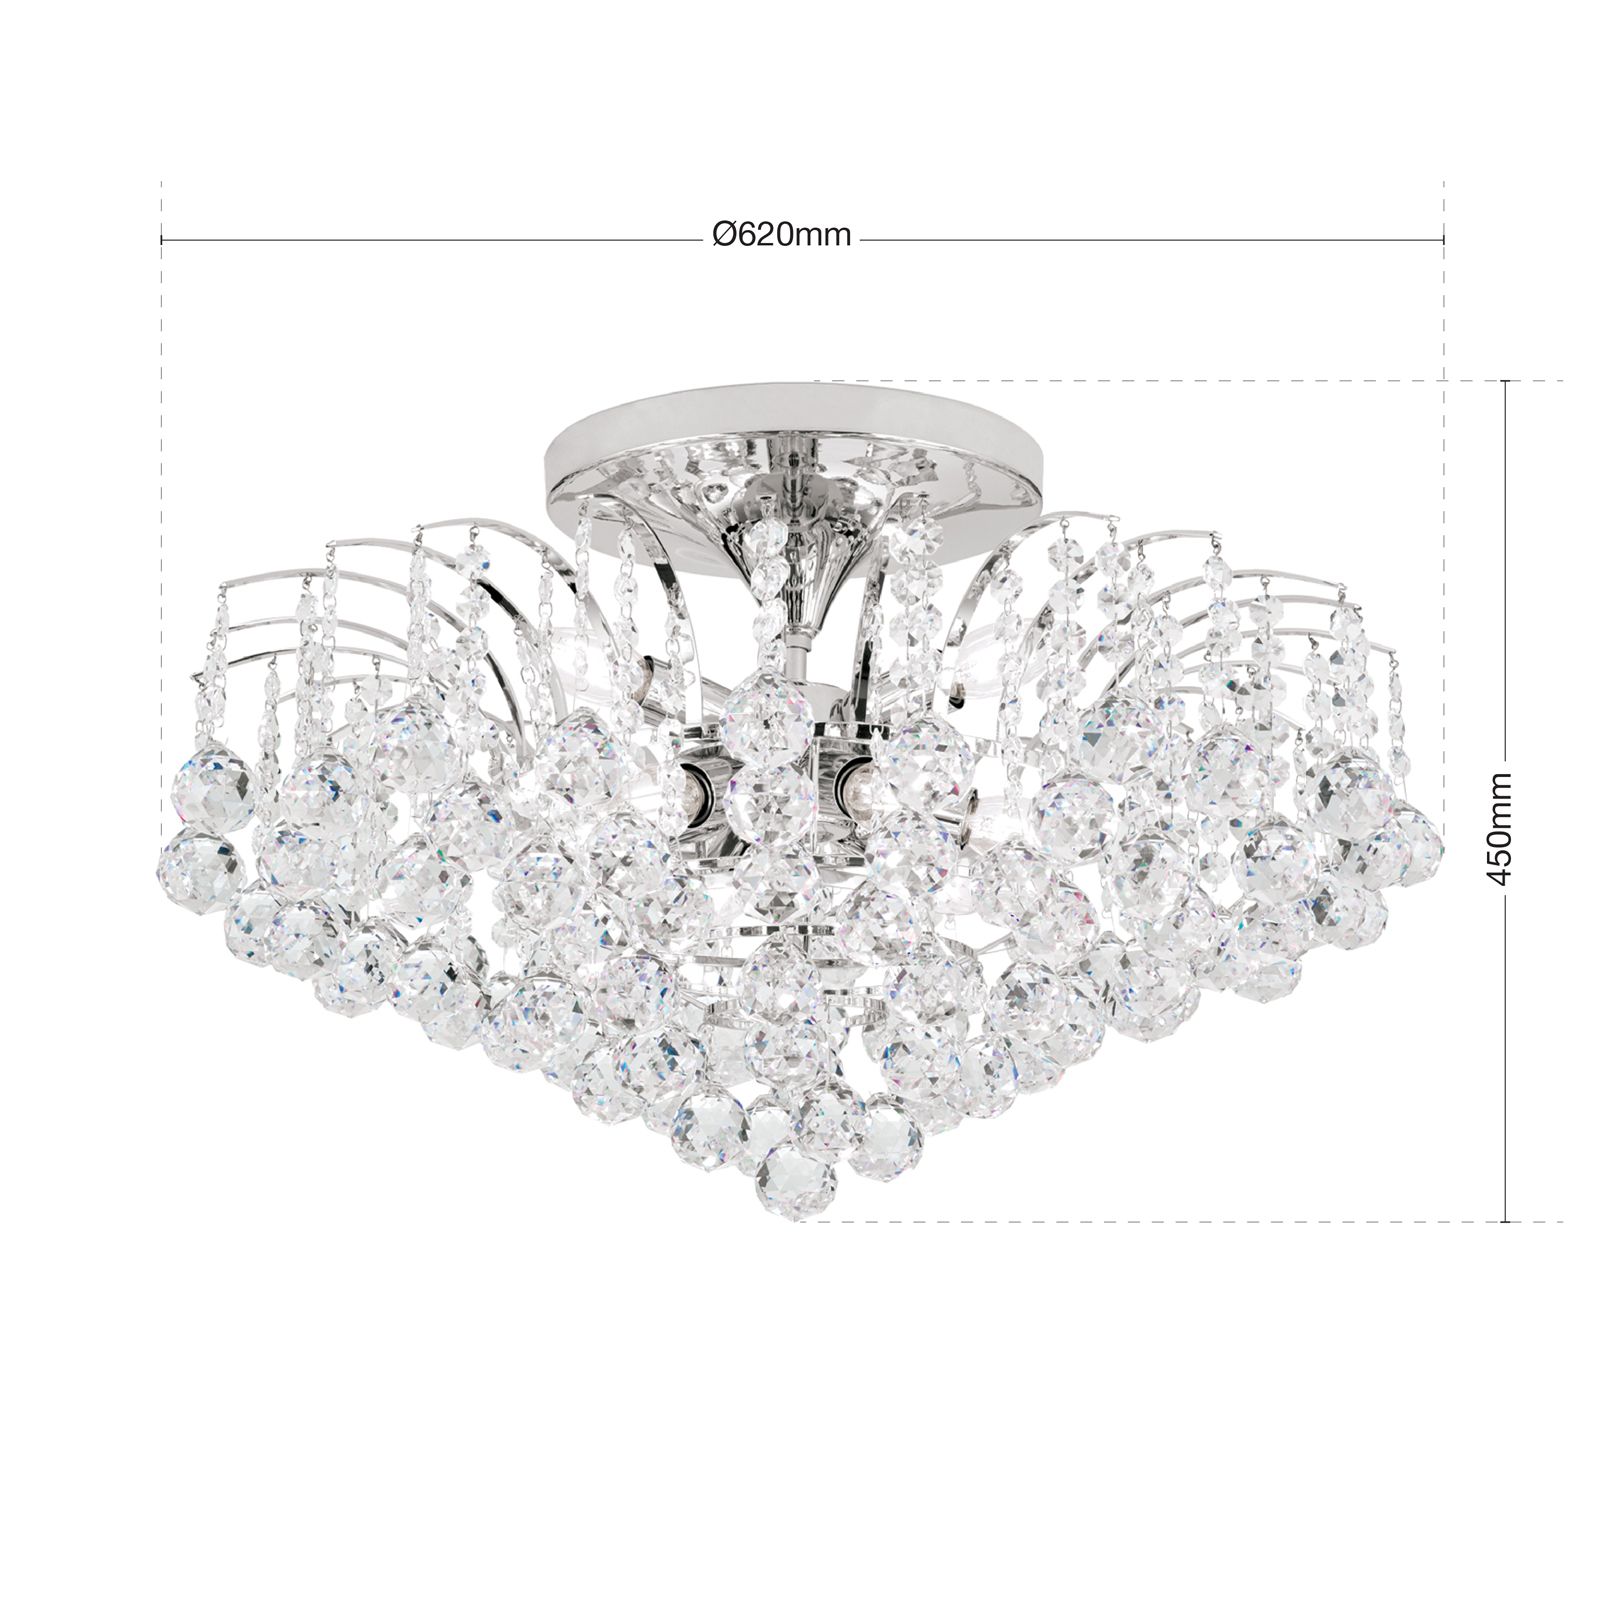 KRISTALL KLASSISCH clear lamps, crystal light, 9 chrome plated, ceiling